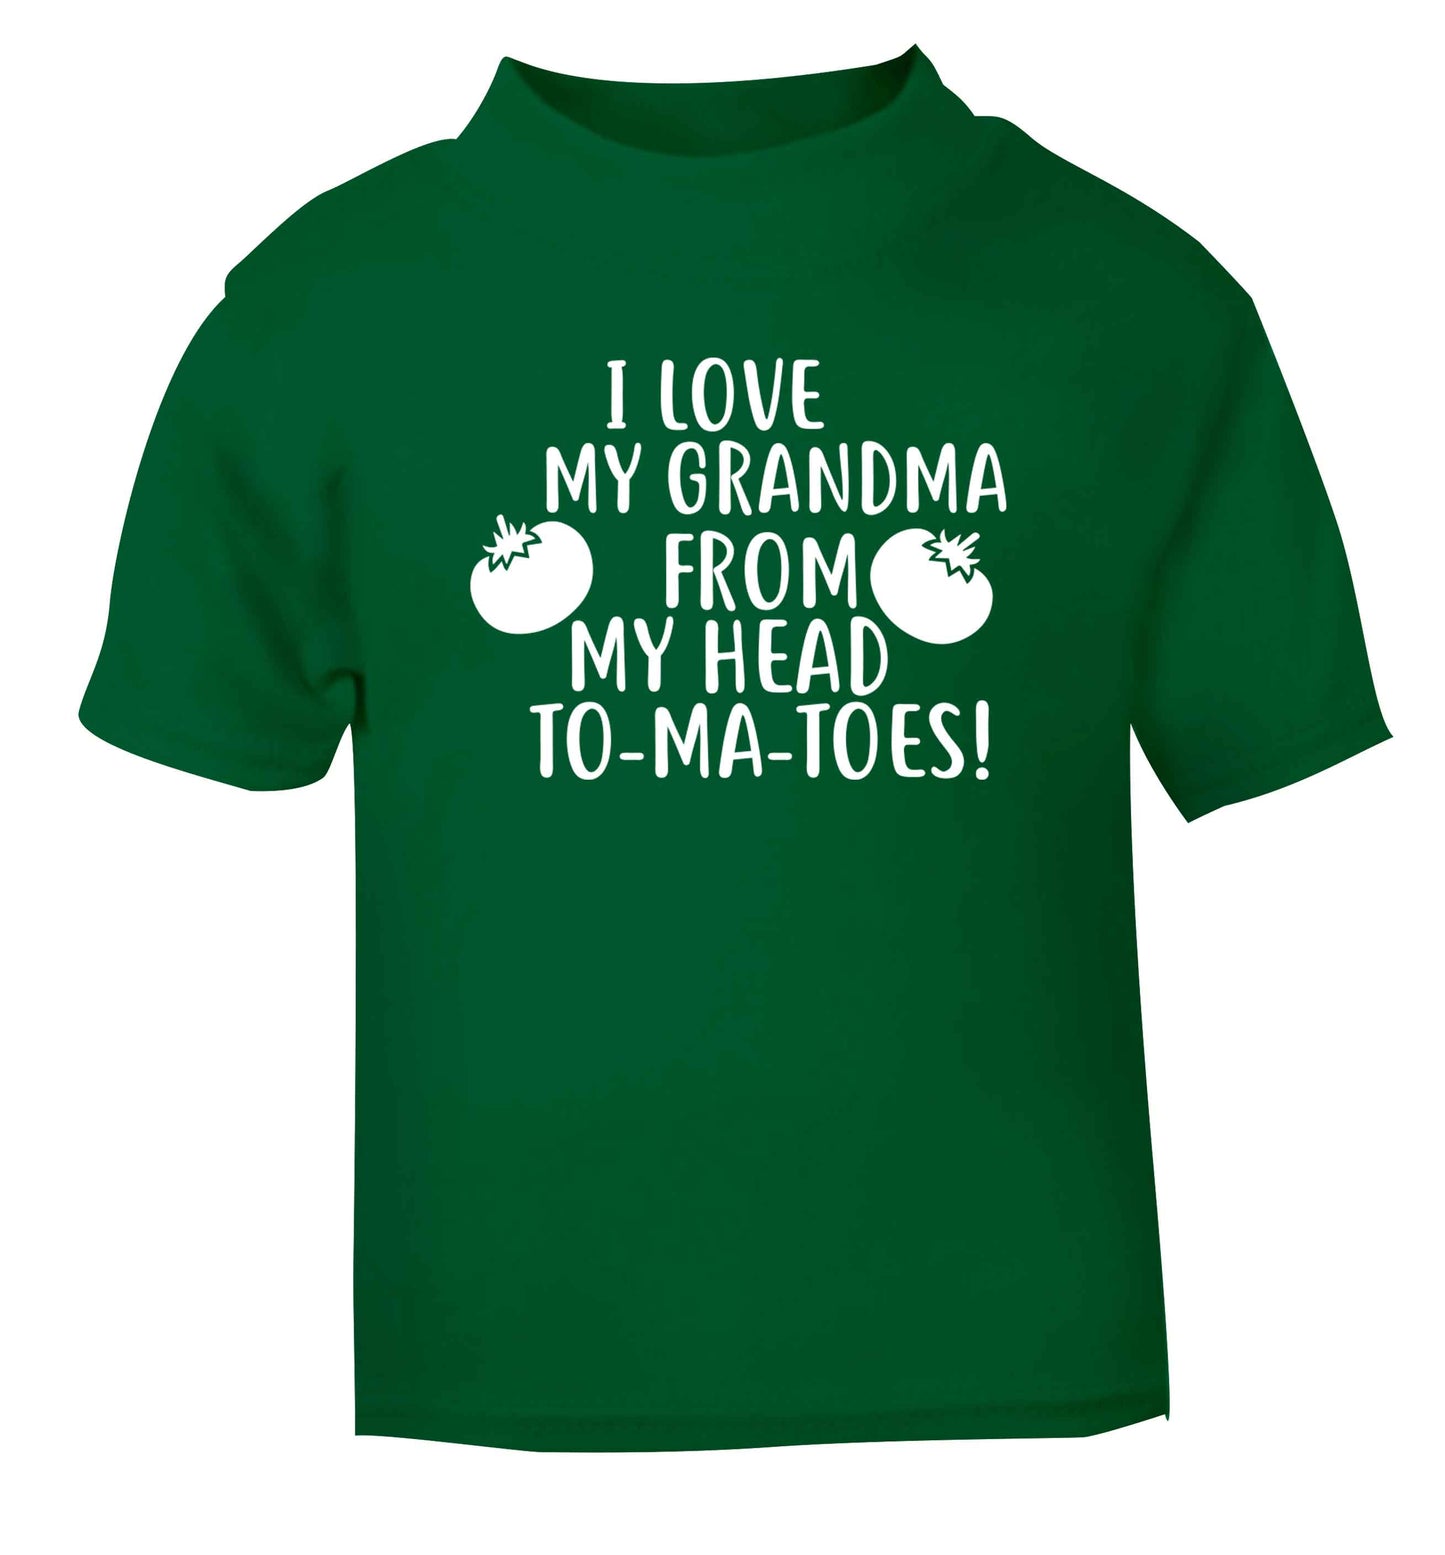 I love my grandma from my head to-ma-toes green Baby Toddler Tshirt 2 Years